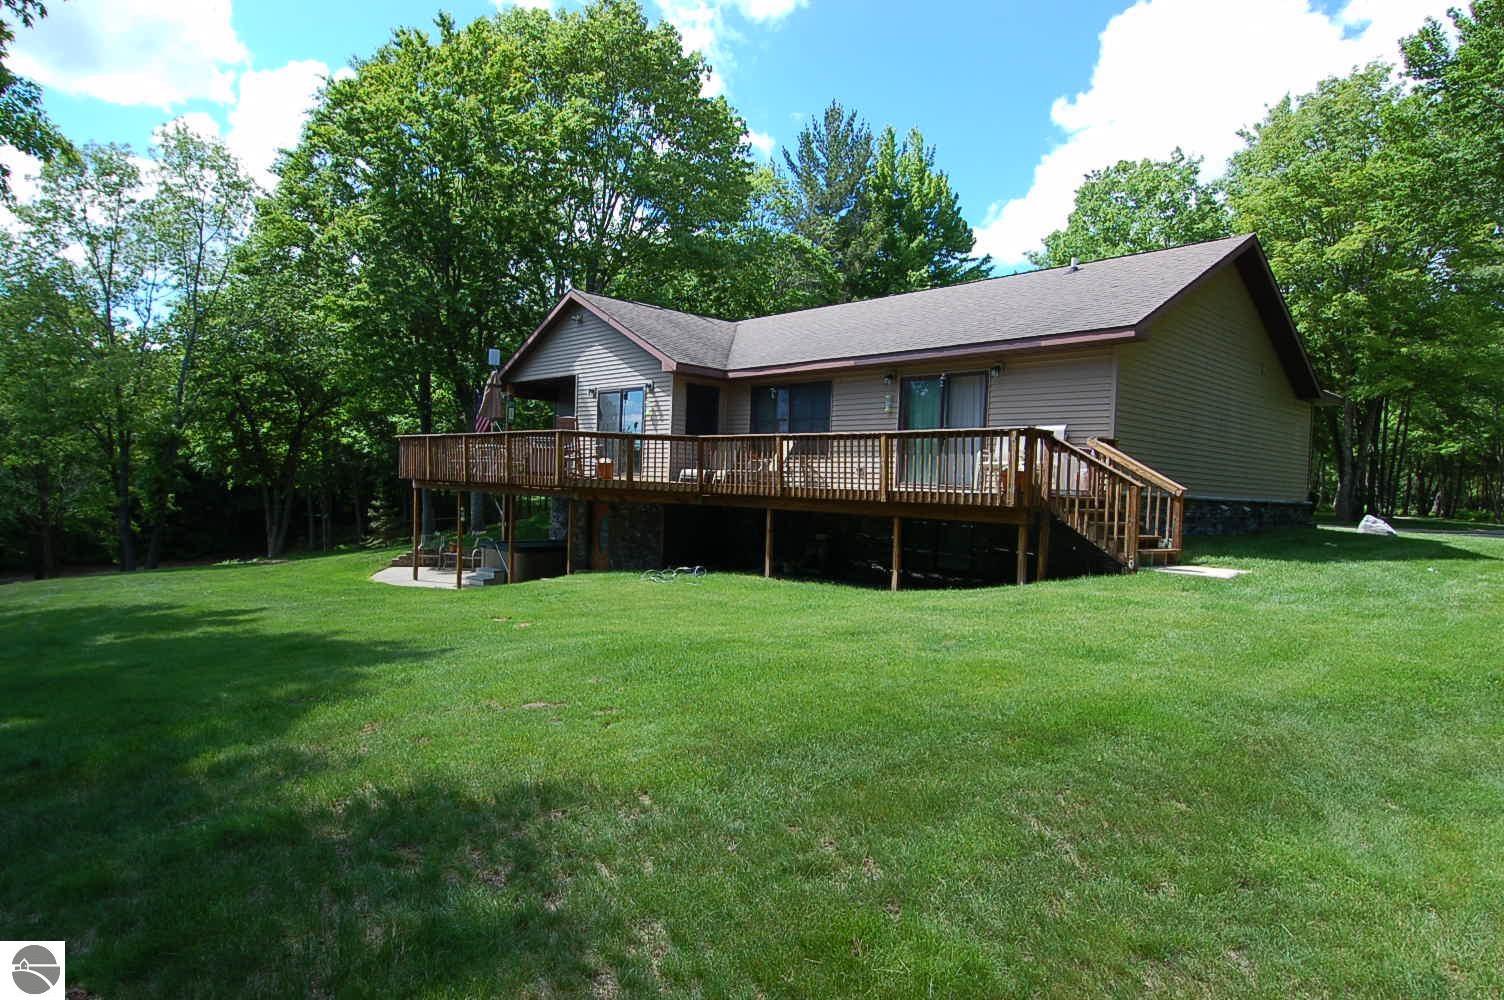 7681 Canthook Drive, Cadillac, MI 49601 photo 40 of 47